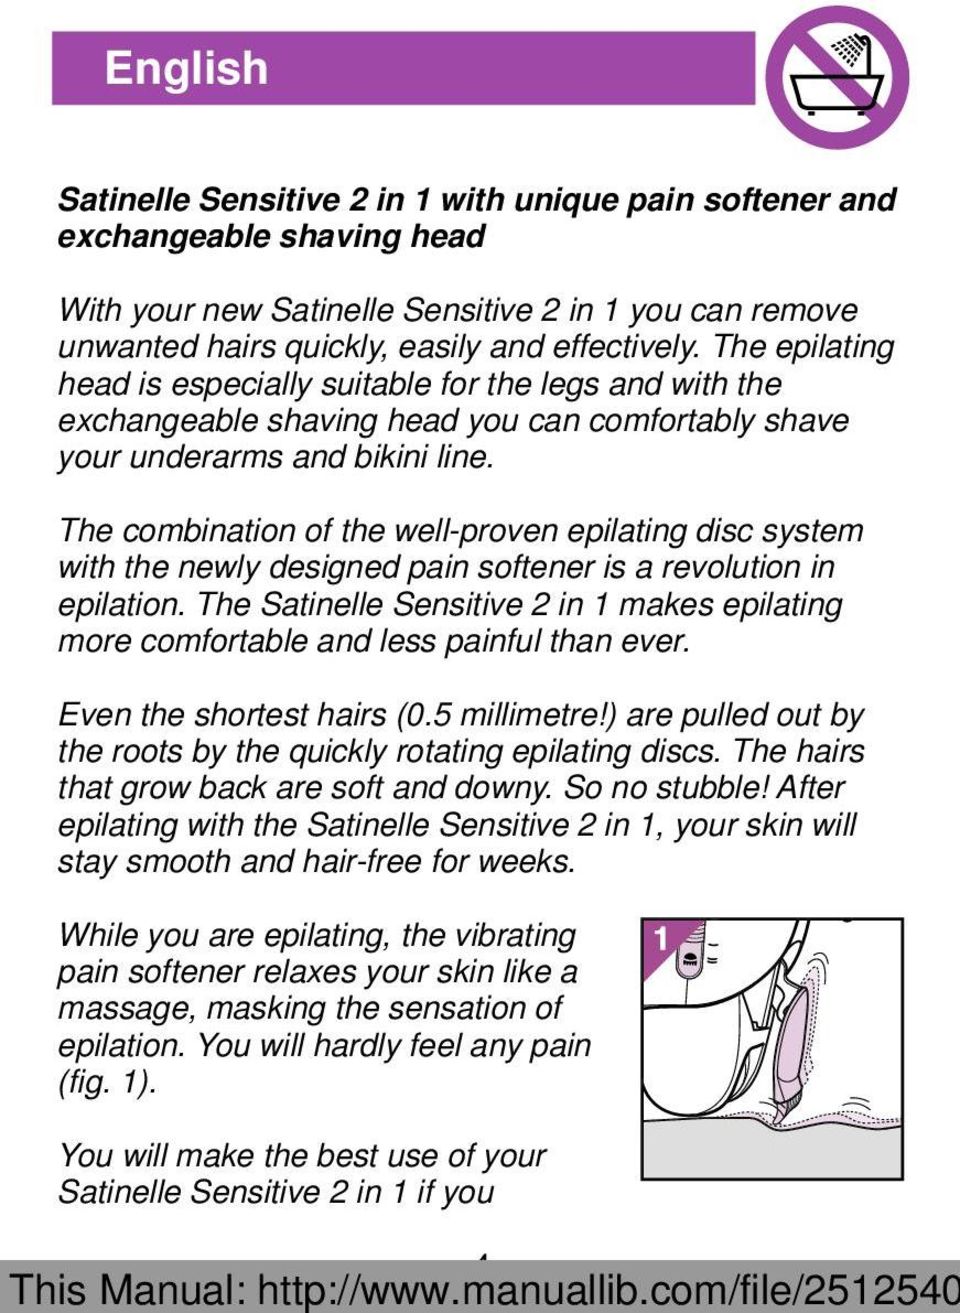 The combination of the well-proven epilating disc system with the newly designed pain softener is a revolution in epilation.